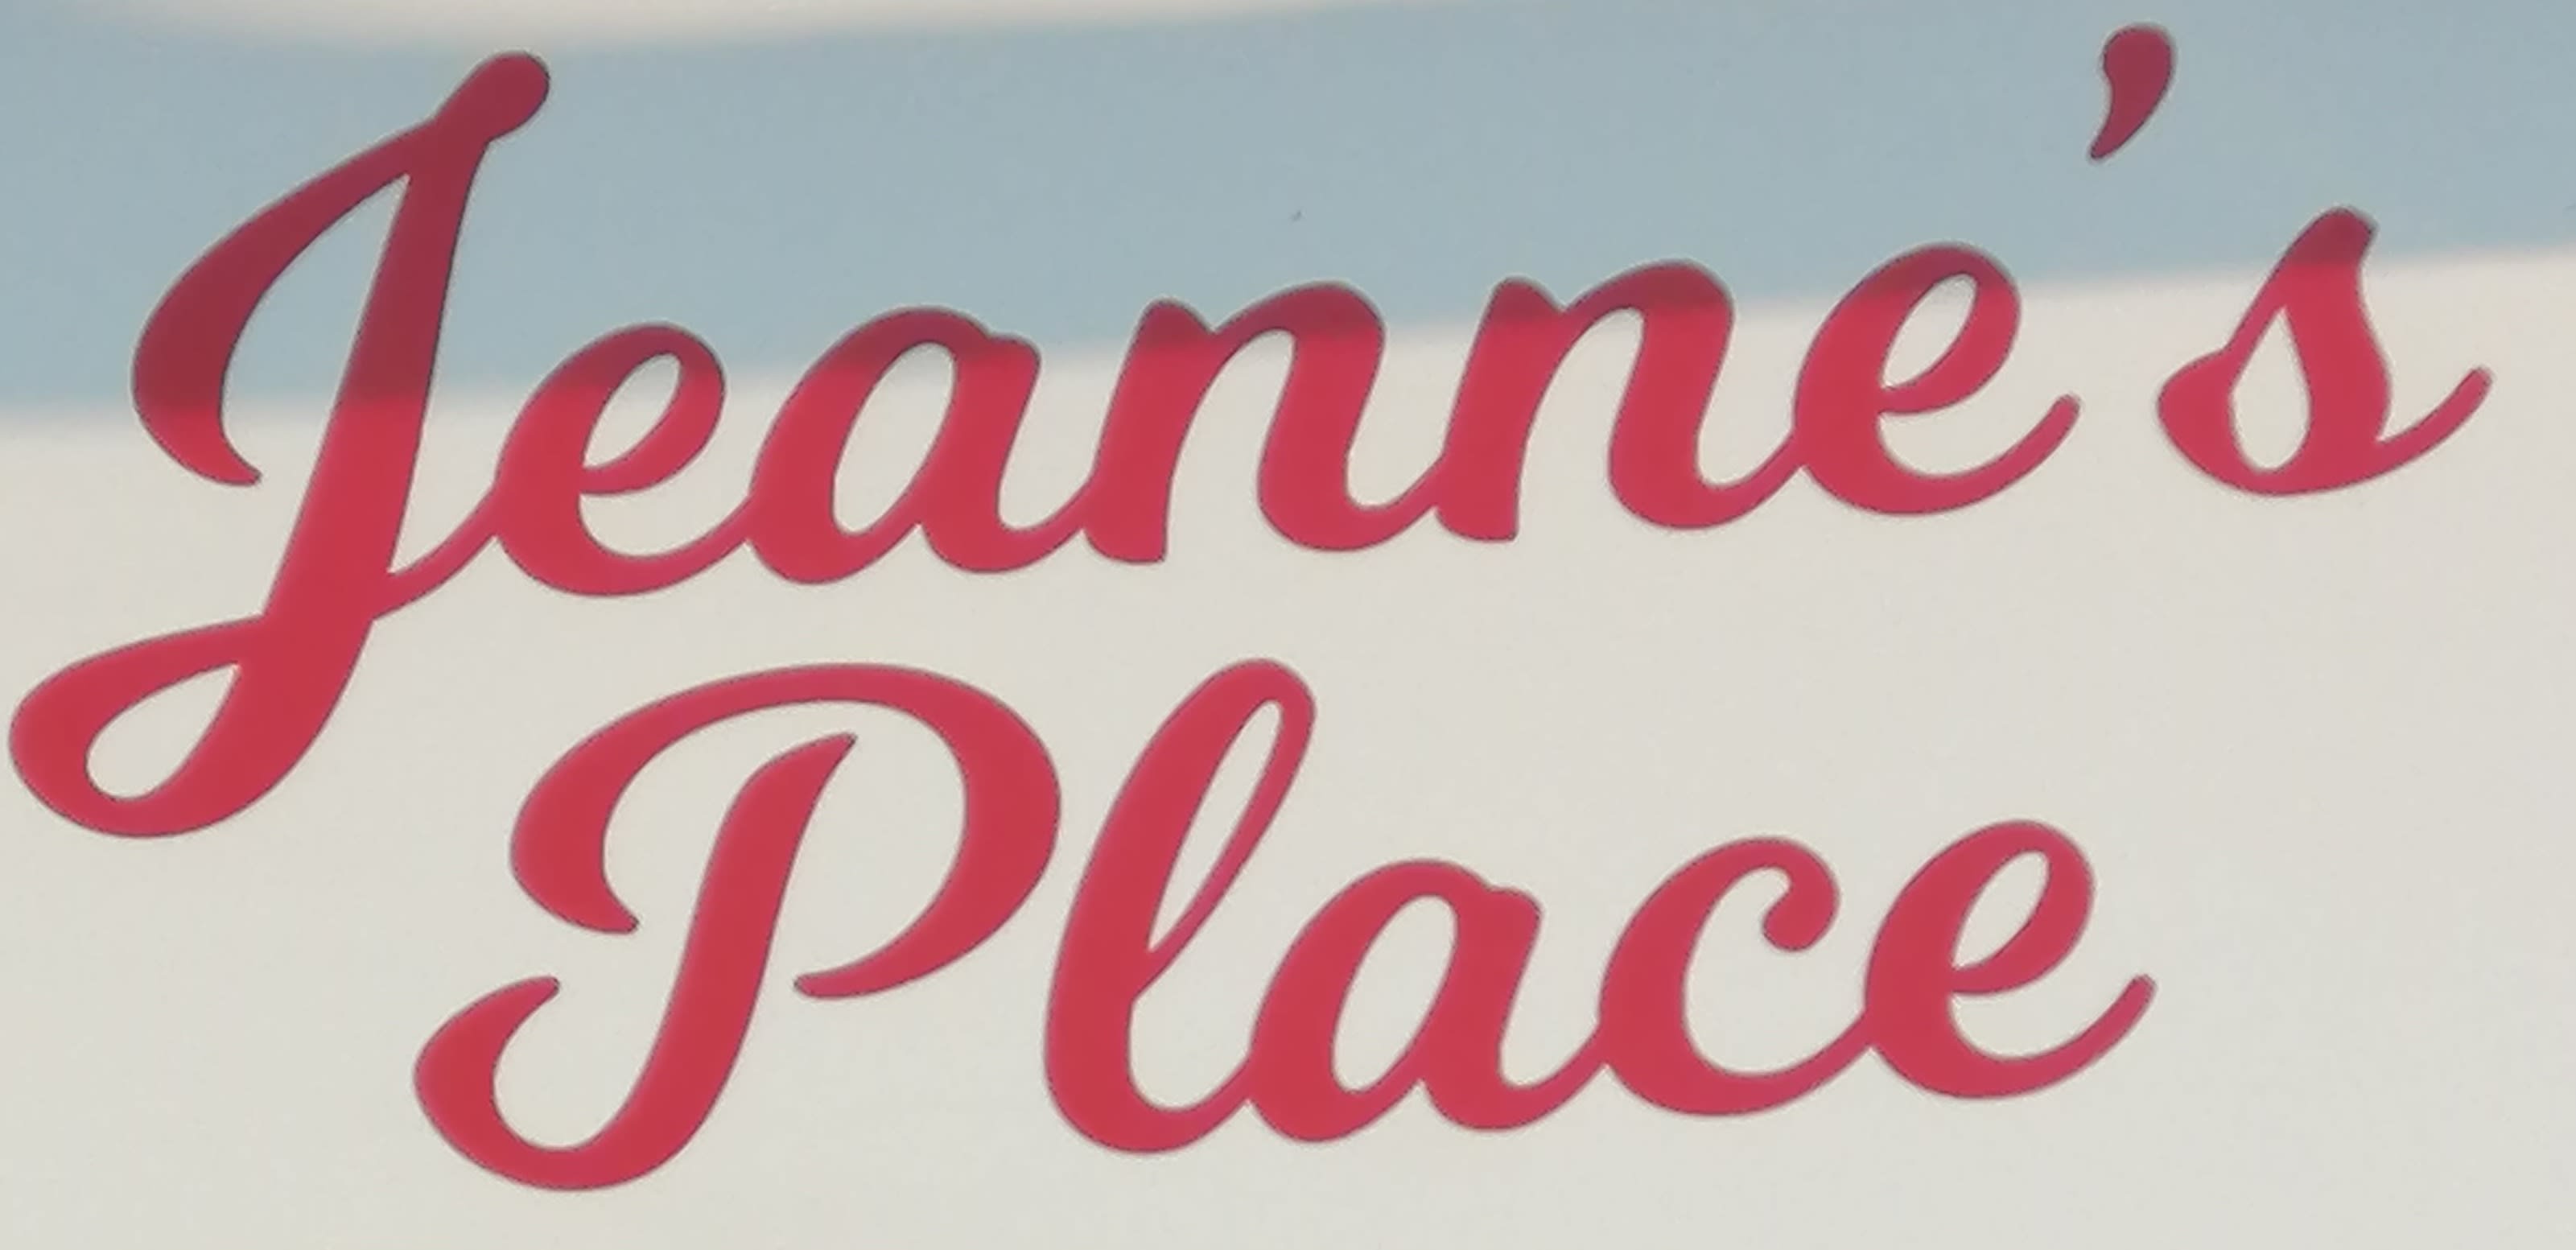 Jeanne's Place